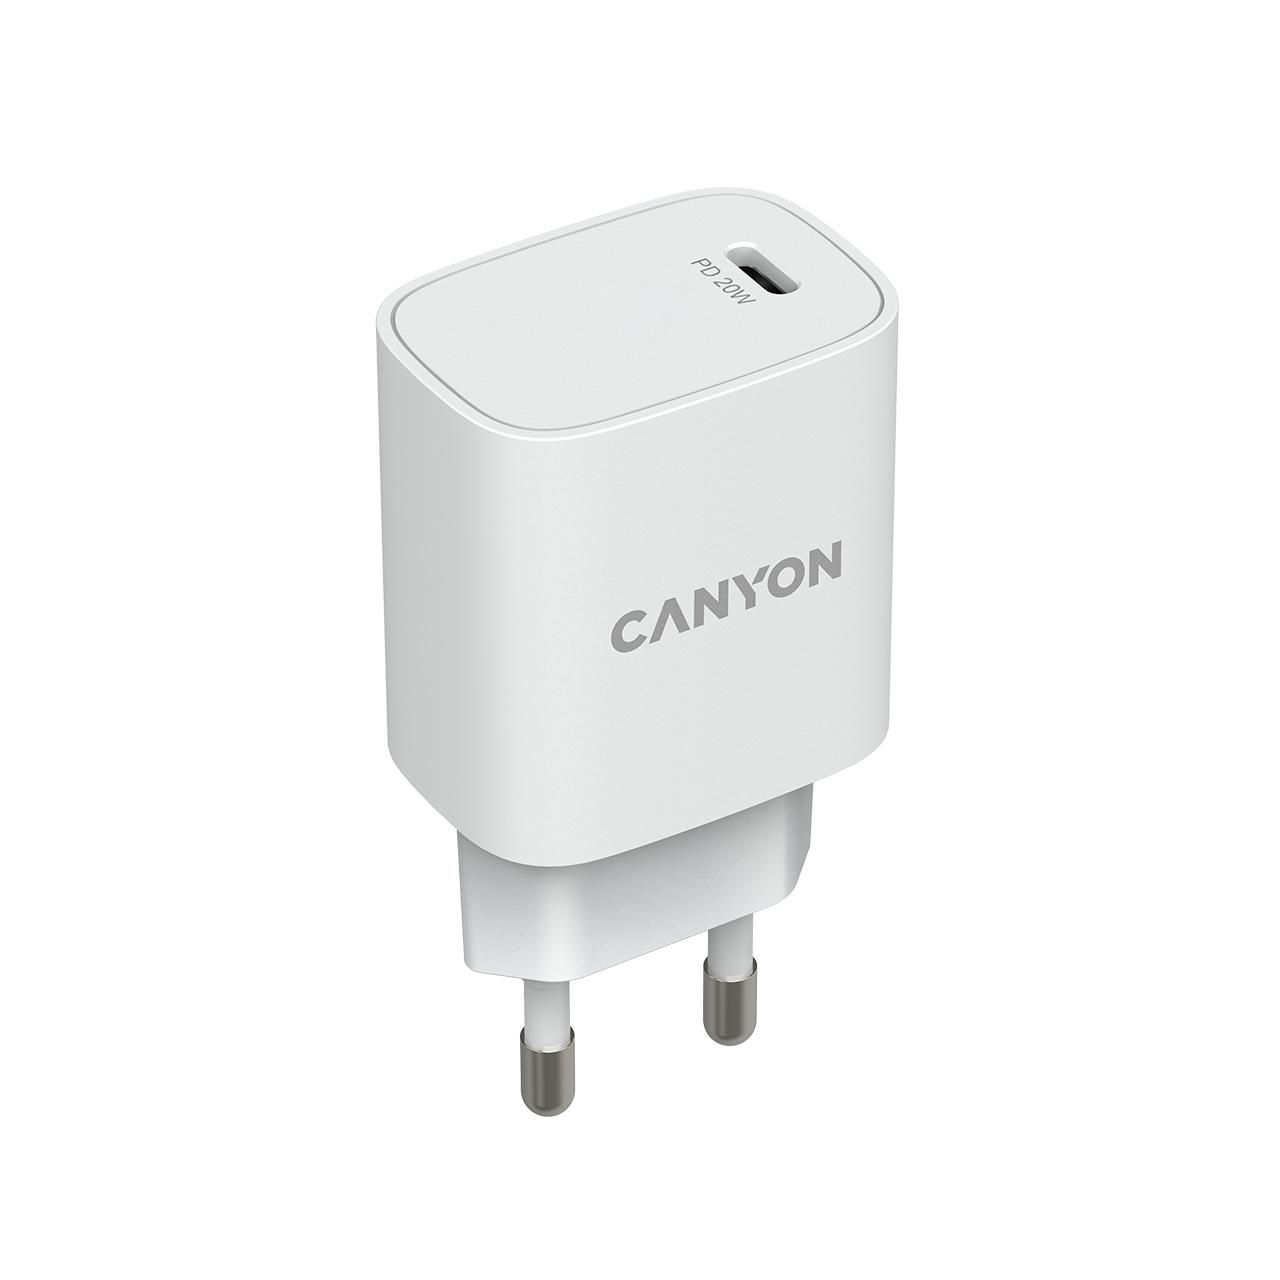 Canyon CNE-CHA20W02 W128291434 Mobile Device Charger White 